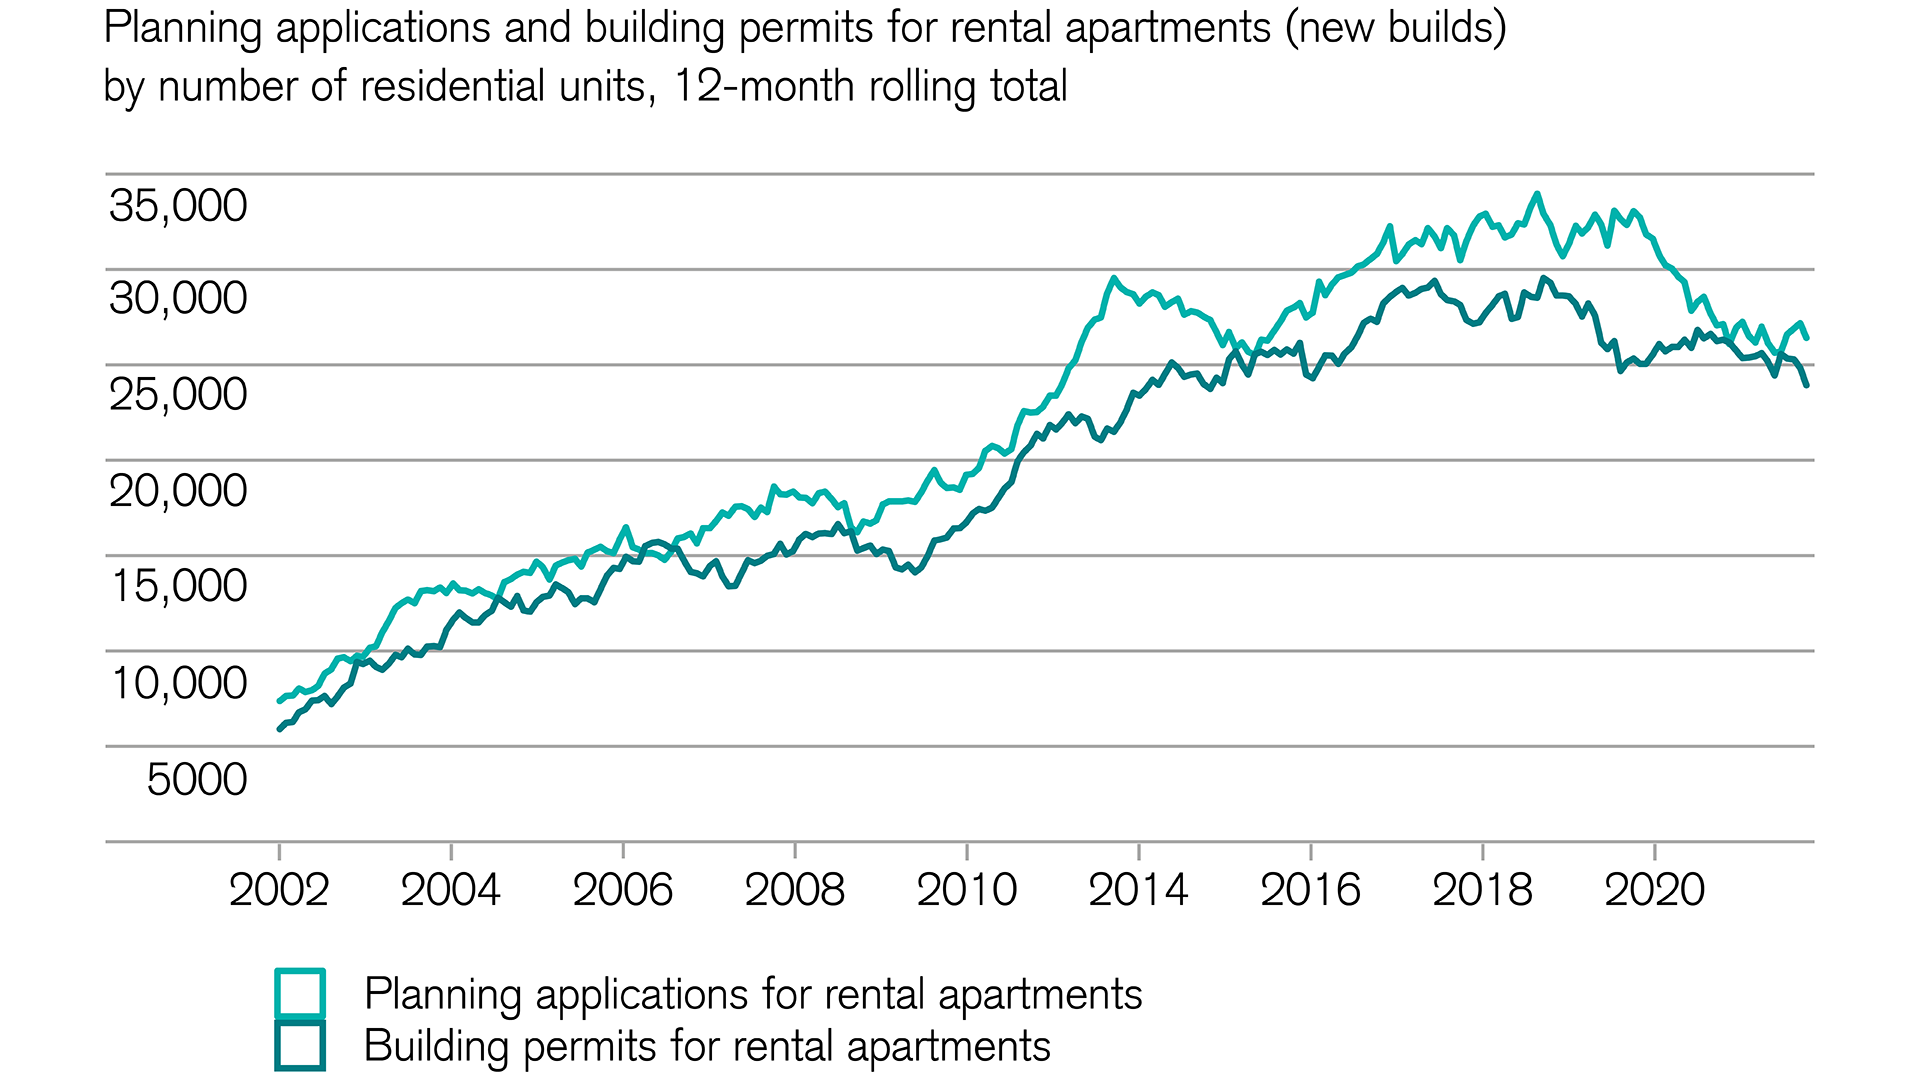 Real estate: Rental apartment building permits hit new low